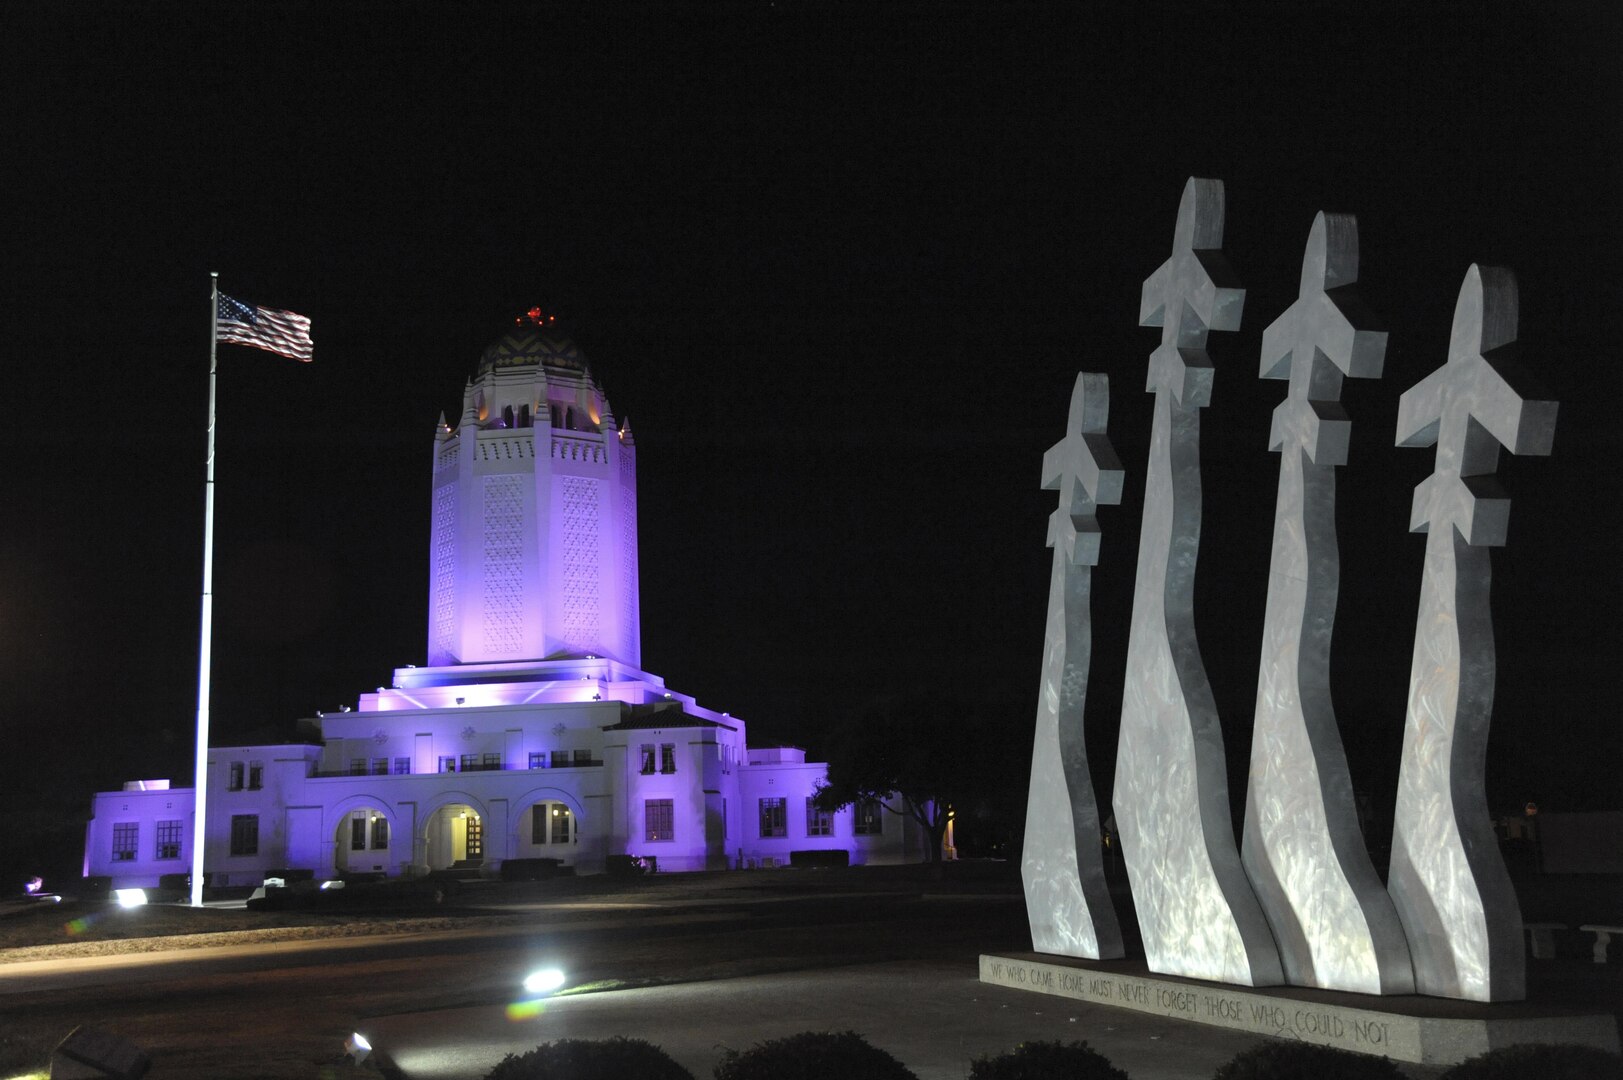 Landmarks at Joint Base San Antonio locations are bathed in purple light every night this month to raise awareness of a problem that impacts lives and can have a detrimental effect on military families as well as mission readiness.
Purple is the color of Domestic Violence Prevention and Awareness Month, which is being observed at JBSA with the theme “Break the Silence, Stop the Violence.”
